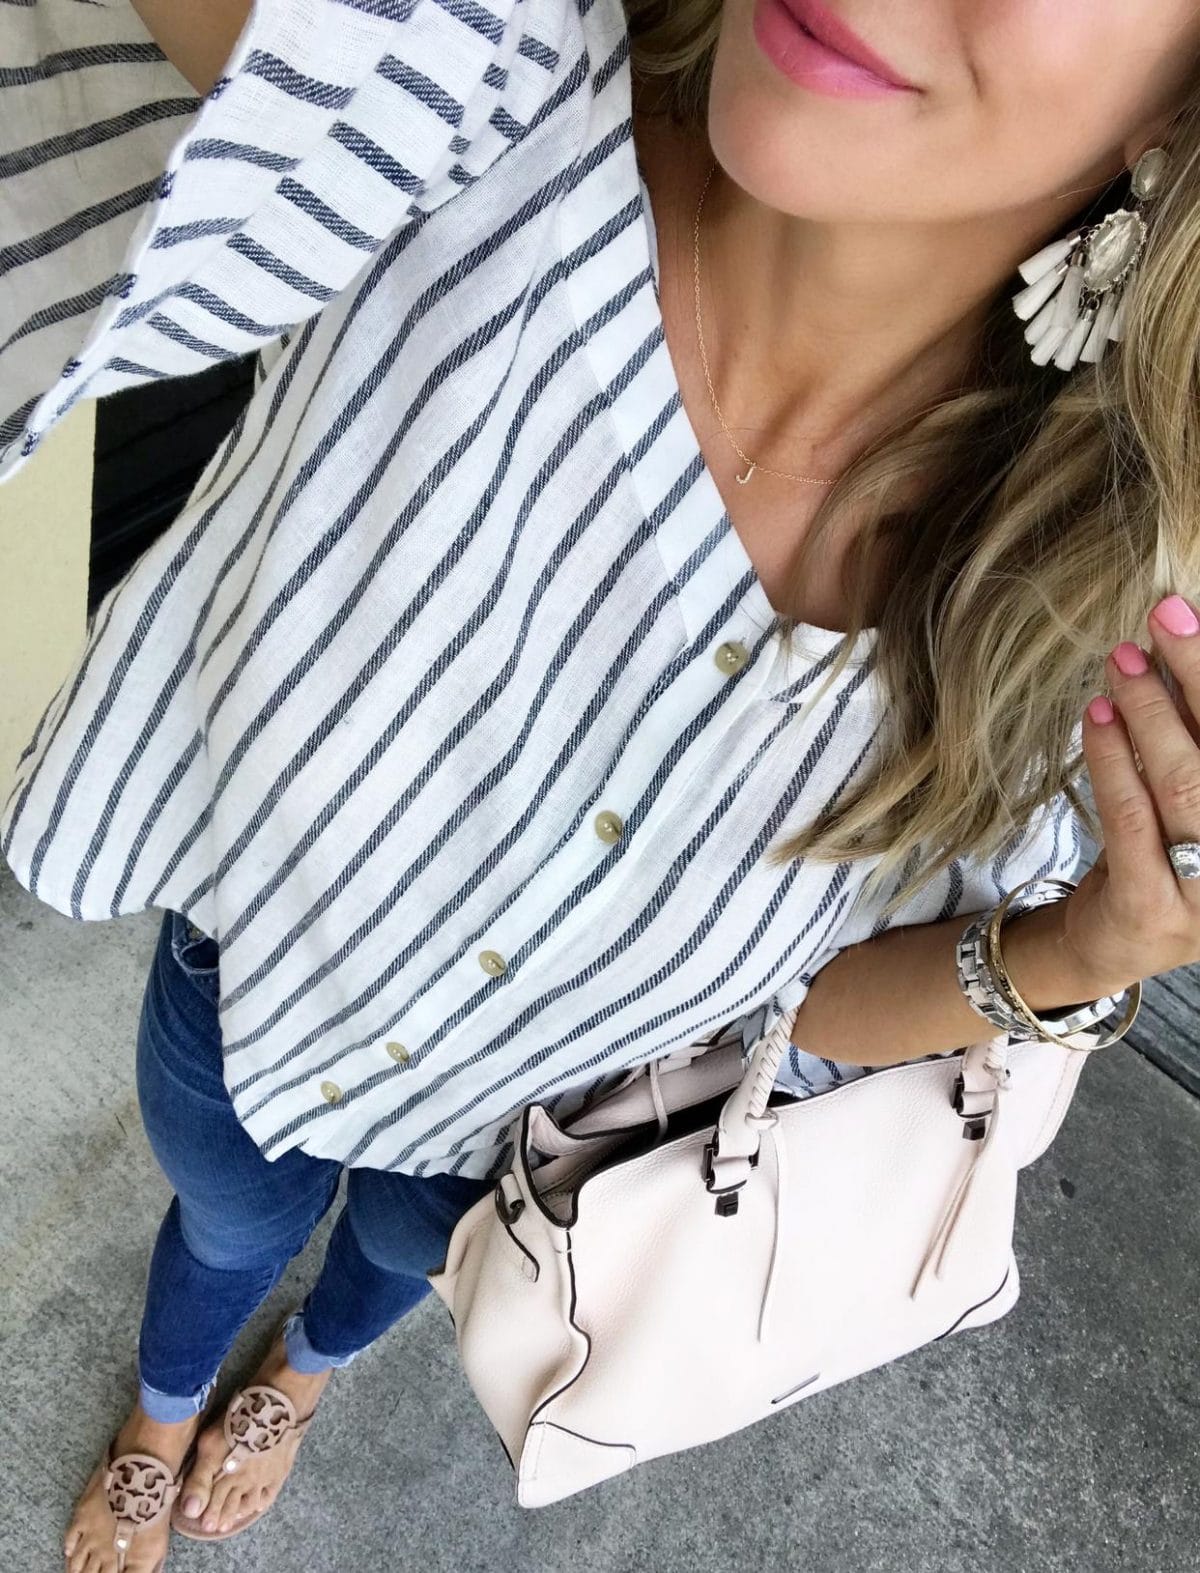 Spring outfit - Striped cold shoulder top jeans and flat sandals